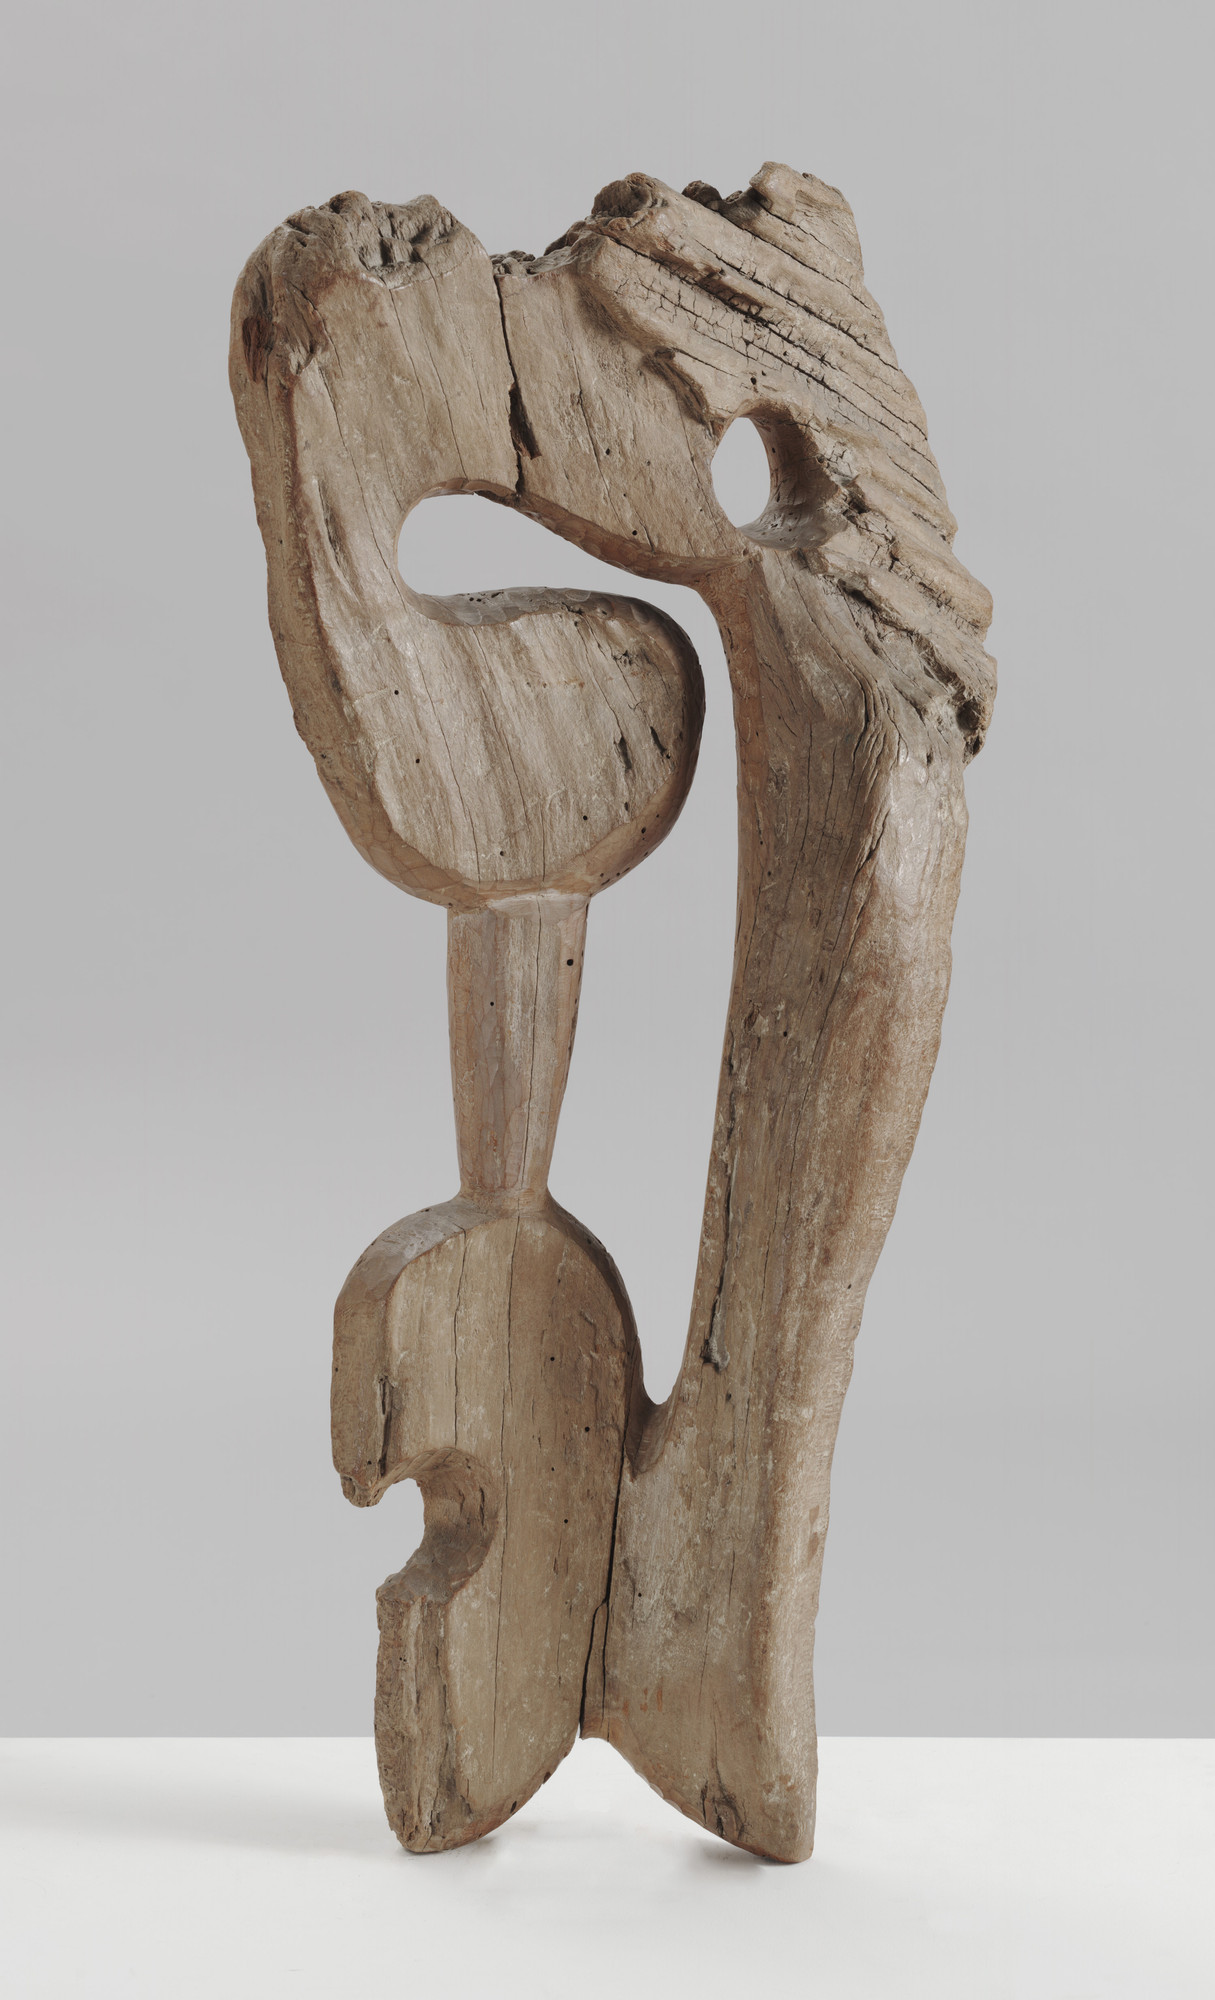 Driftwood  
 41 x 21 x 8 1/4" (104.1 x 53.3 x 20.9 cm)  
 No secondary markings  
 Florene May Schoenborn Bequest  
 © 2010 Estate of Isamu Noguchi / Artists Rights Society (ARS), New York